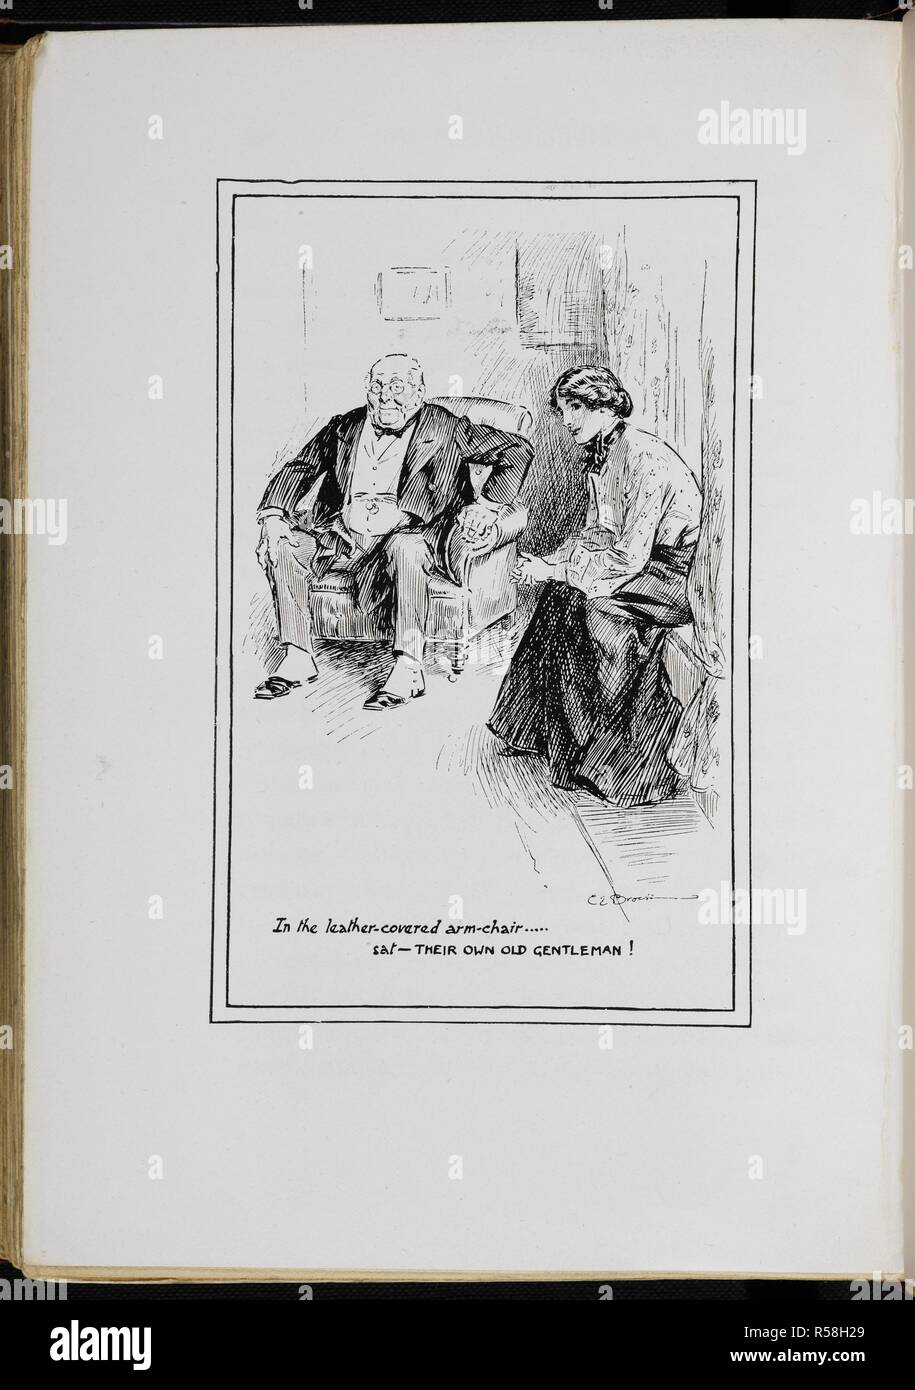 'In the leather-covered arm-chair - their old gentleman !'. The Railway Children With drawings by C E Brock. London : Wells Gardner & Co., 1906. Source: 12813.y.7 page 285. Language: English. Author: Brock, Charles Edmund. Nesbit, afterwards Bland, Edith. Stock Photo